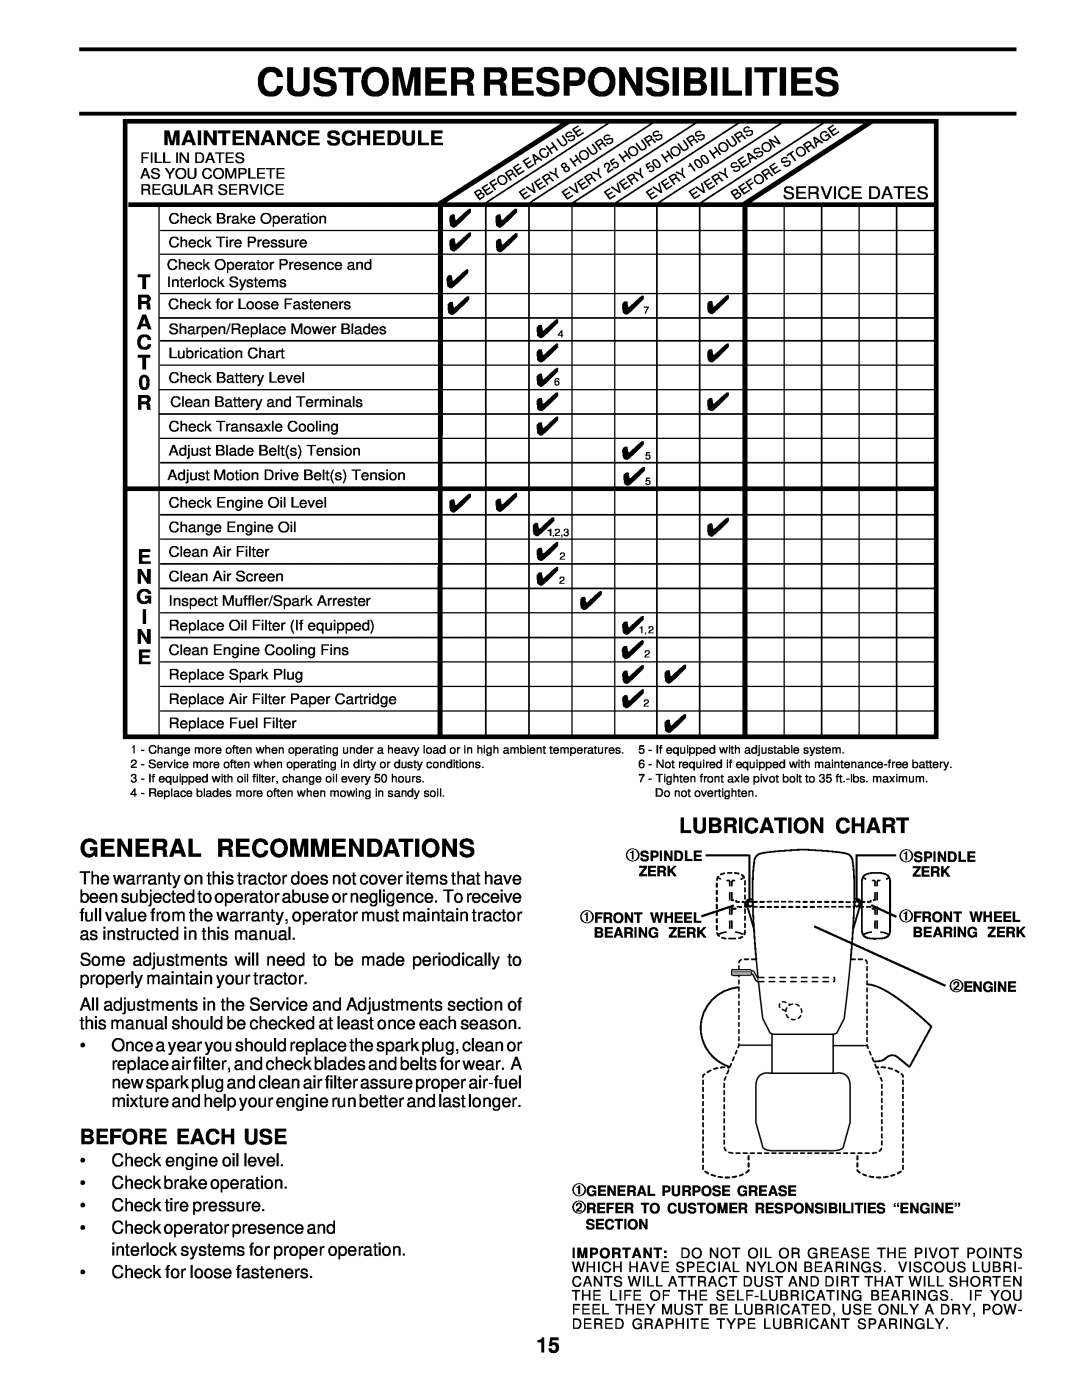 Poulan PR20H42STB owner manual Customer Responsibilities, General Recommendations, Before Each Use, Lubrication Chart 